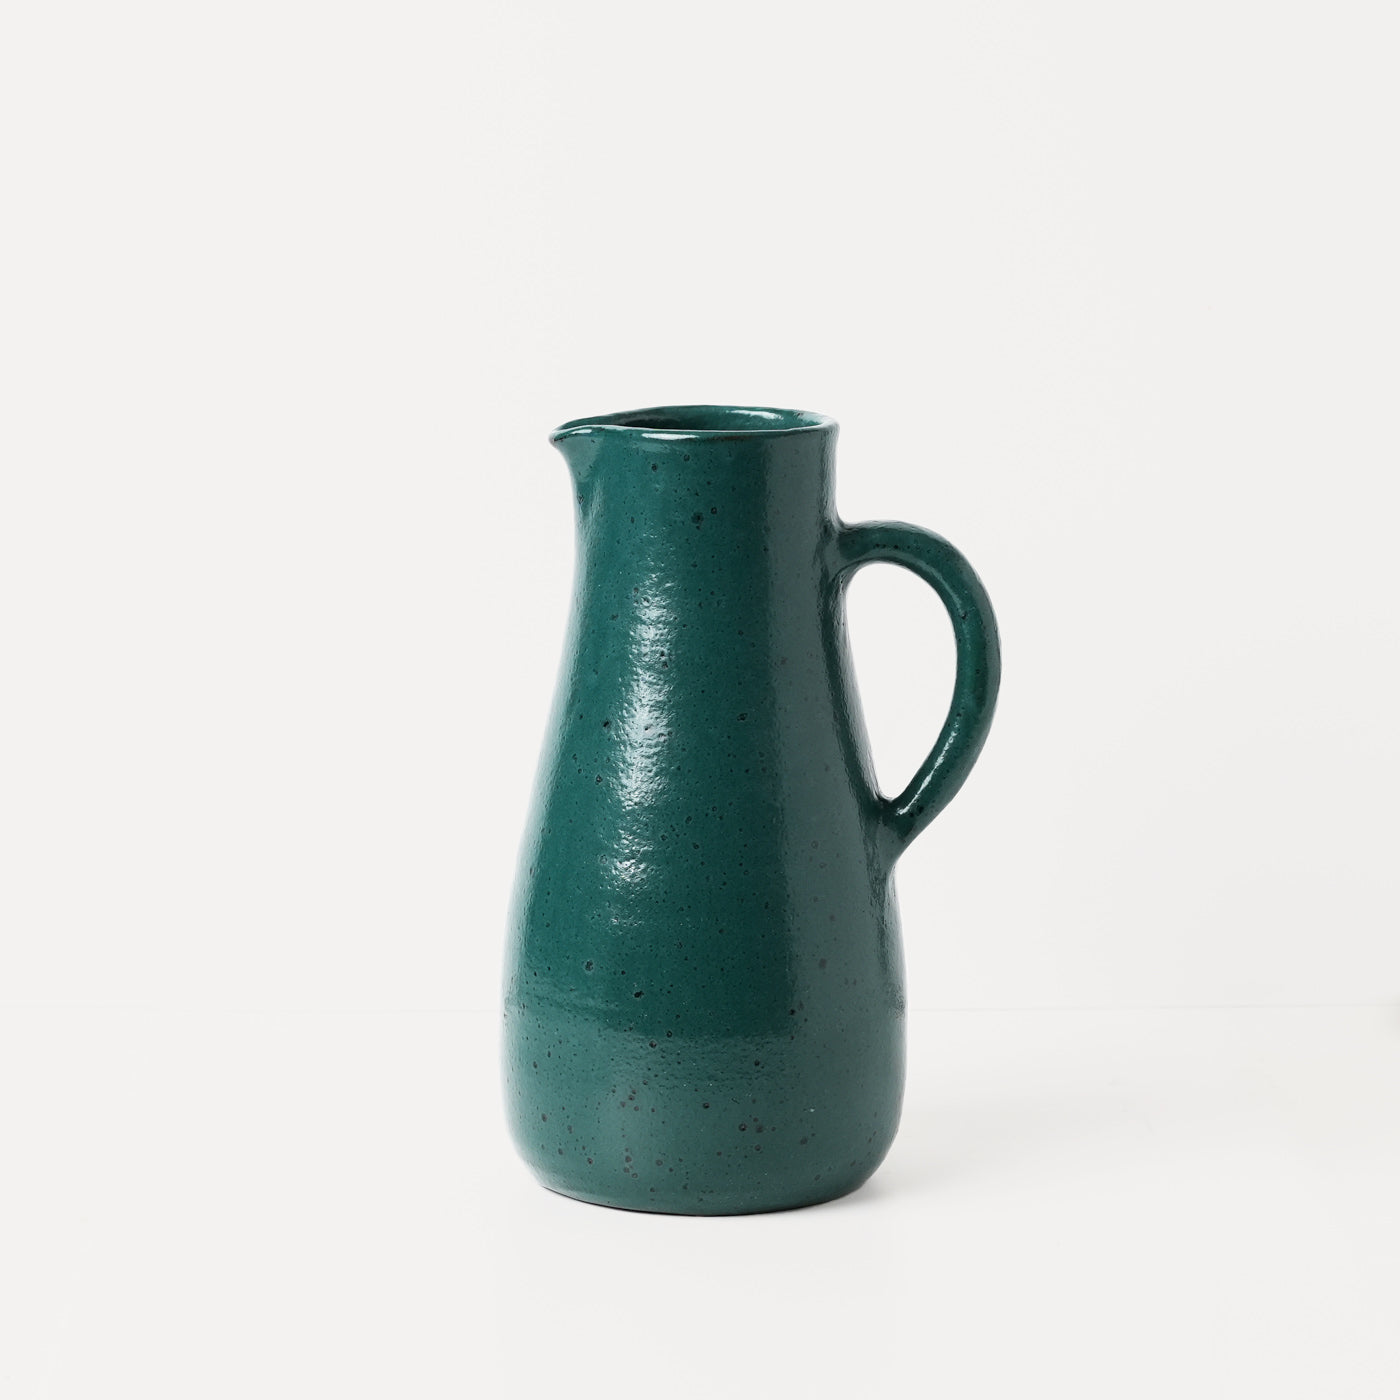 Emerald Green hand thrown ceramic pitcher by Gaëlle Le Doledec